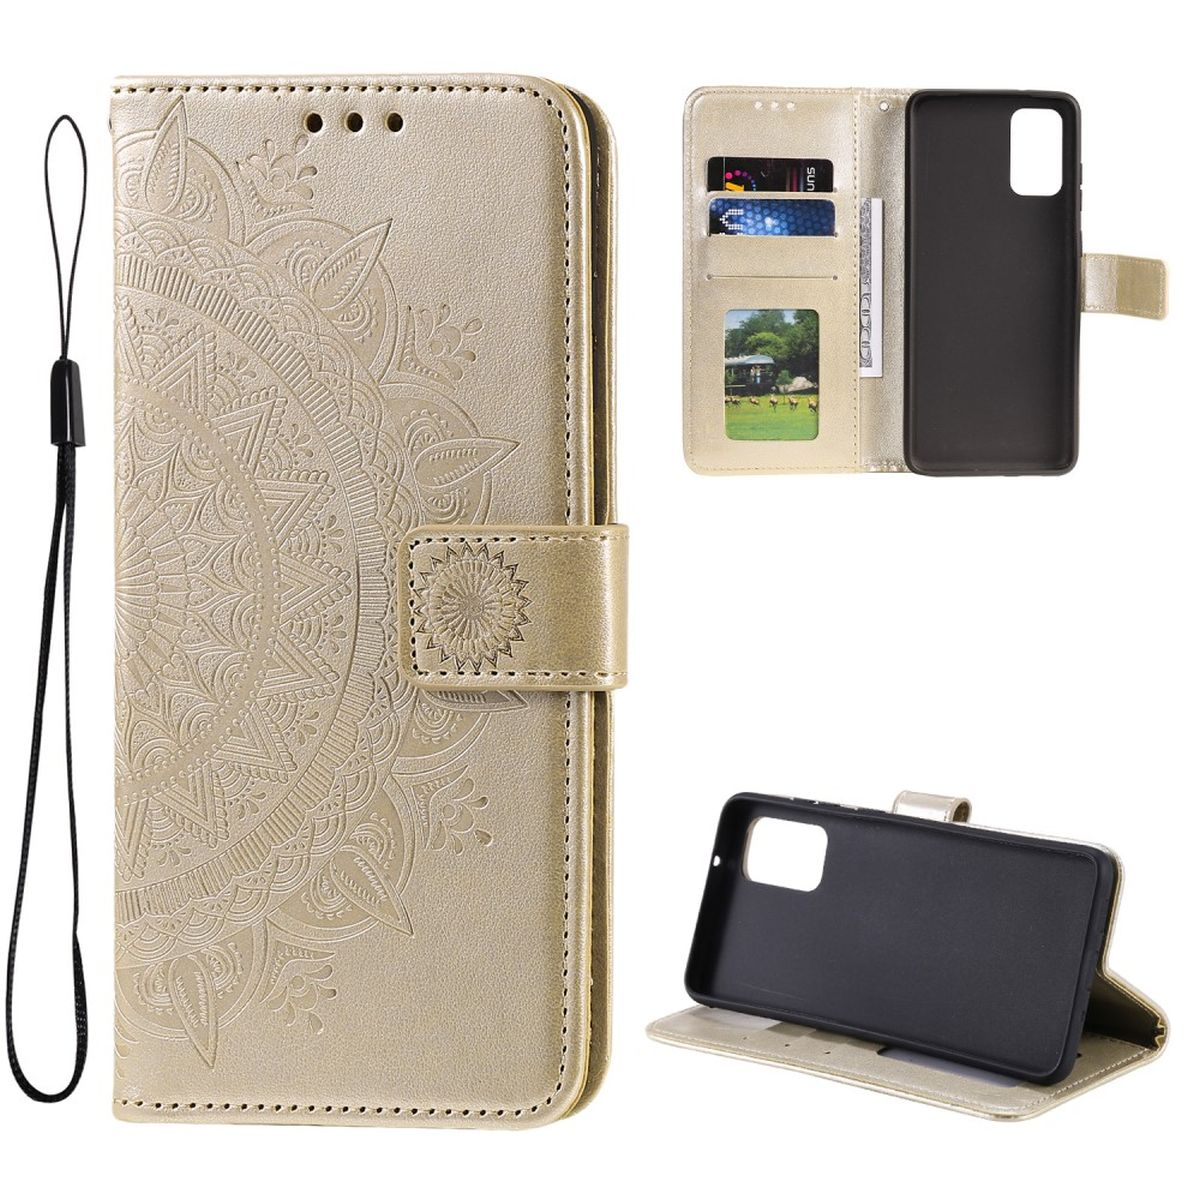 A53 5G, mit COVERKINGZ Galaxy Bookcover, Samsung, Mandala Muster, Klapphülle Rosegold